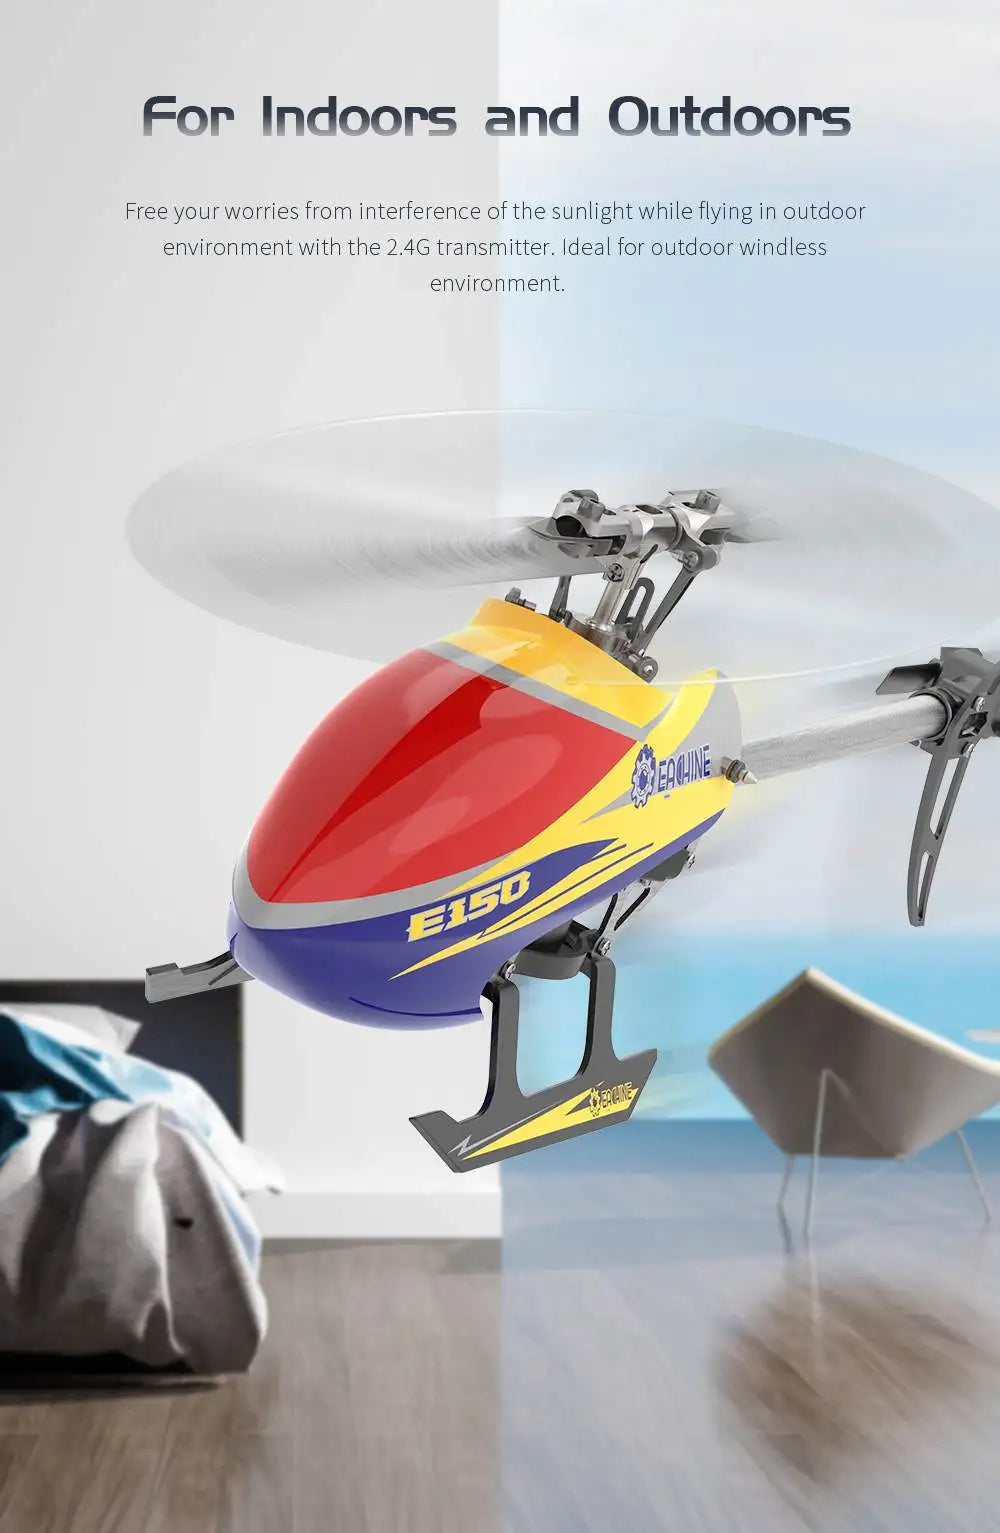 Eachine E150 RC Helicopter, MEAUe _ 2IS0 aV is ideal for outdoor windless environment 